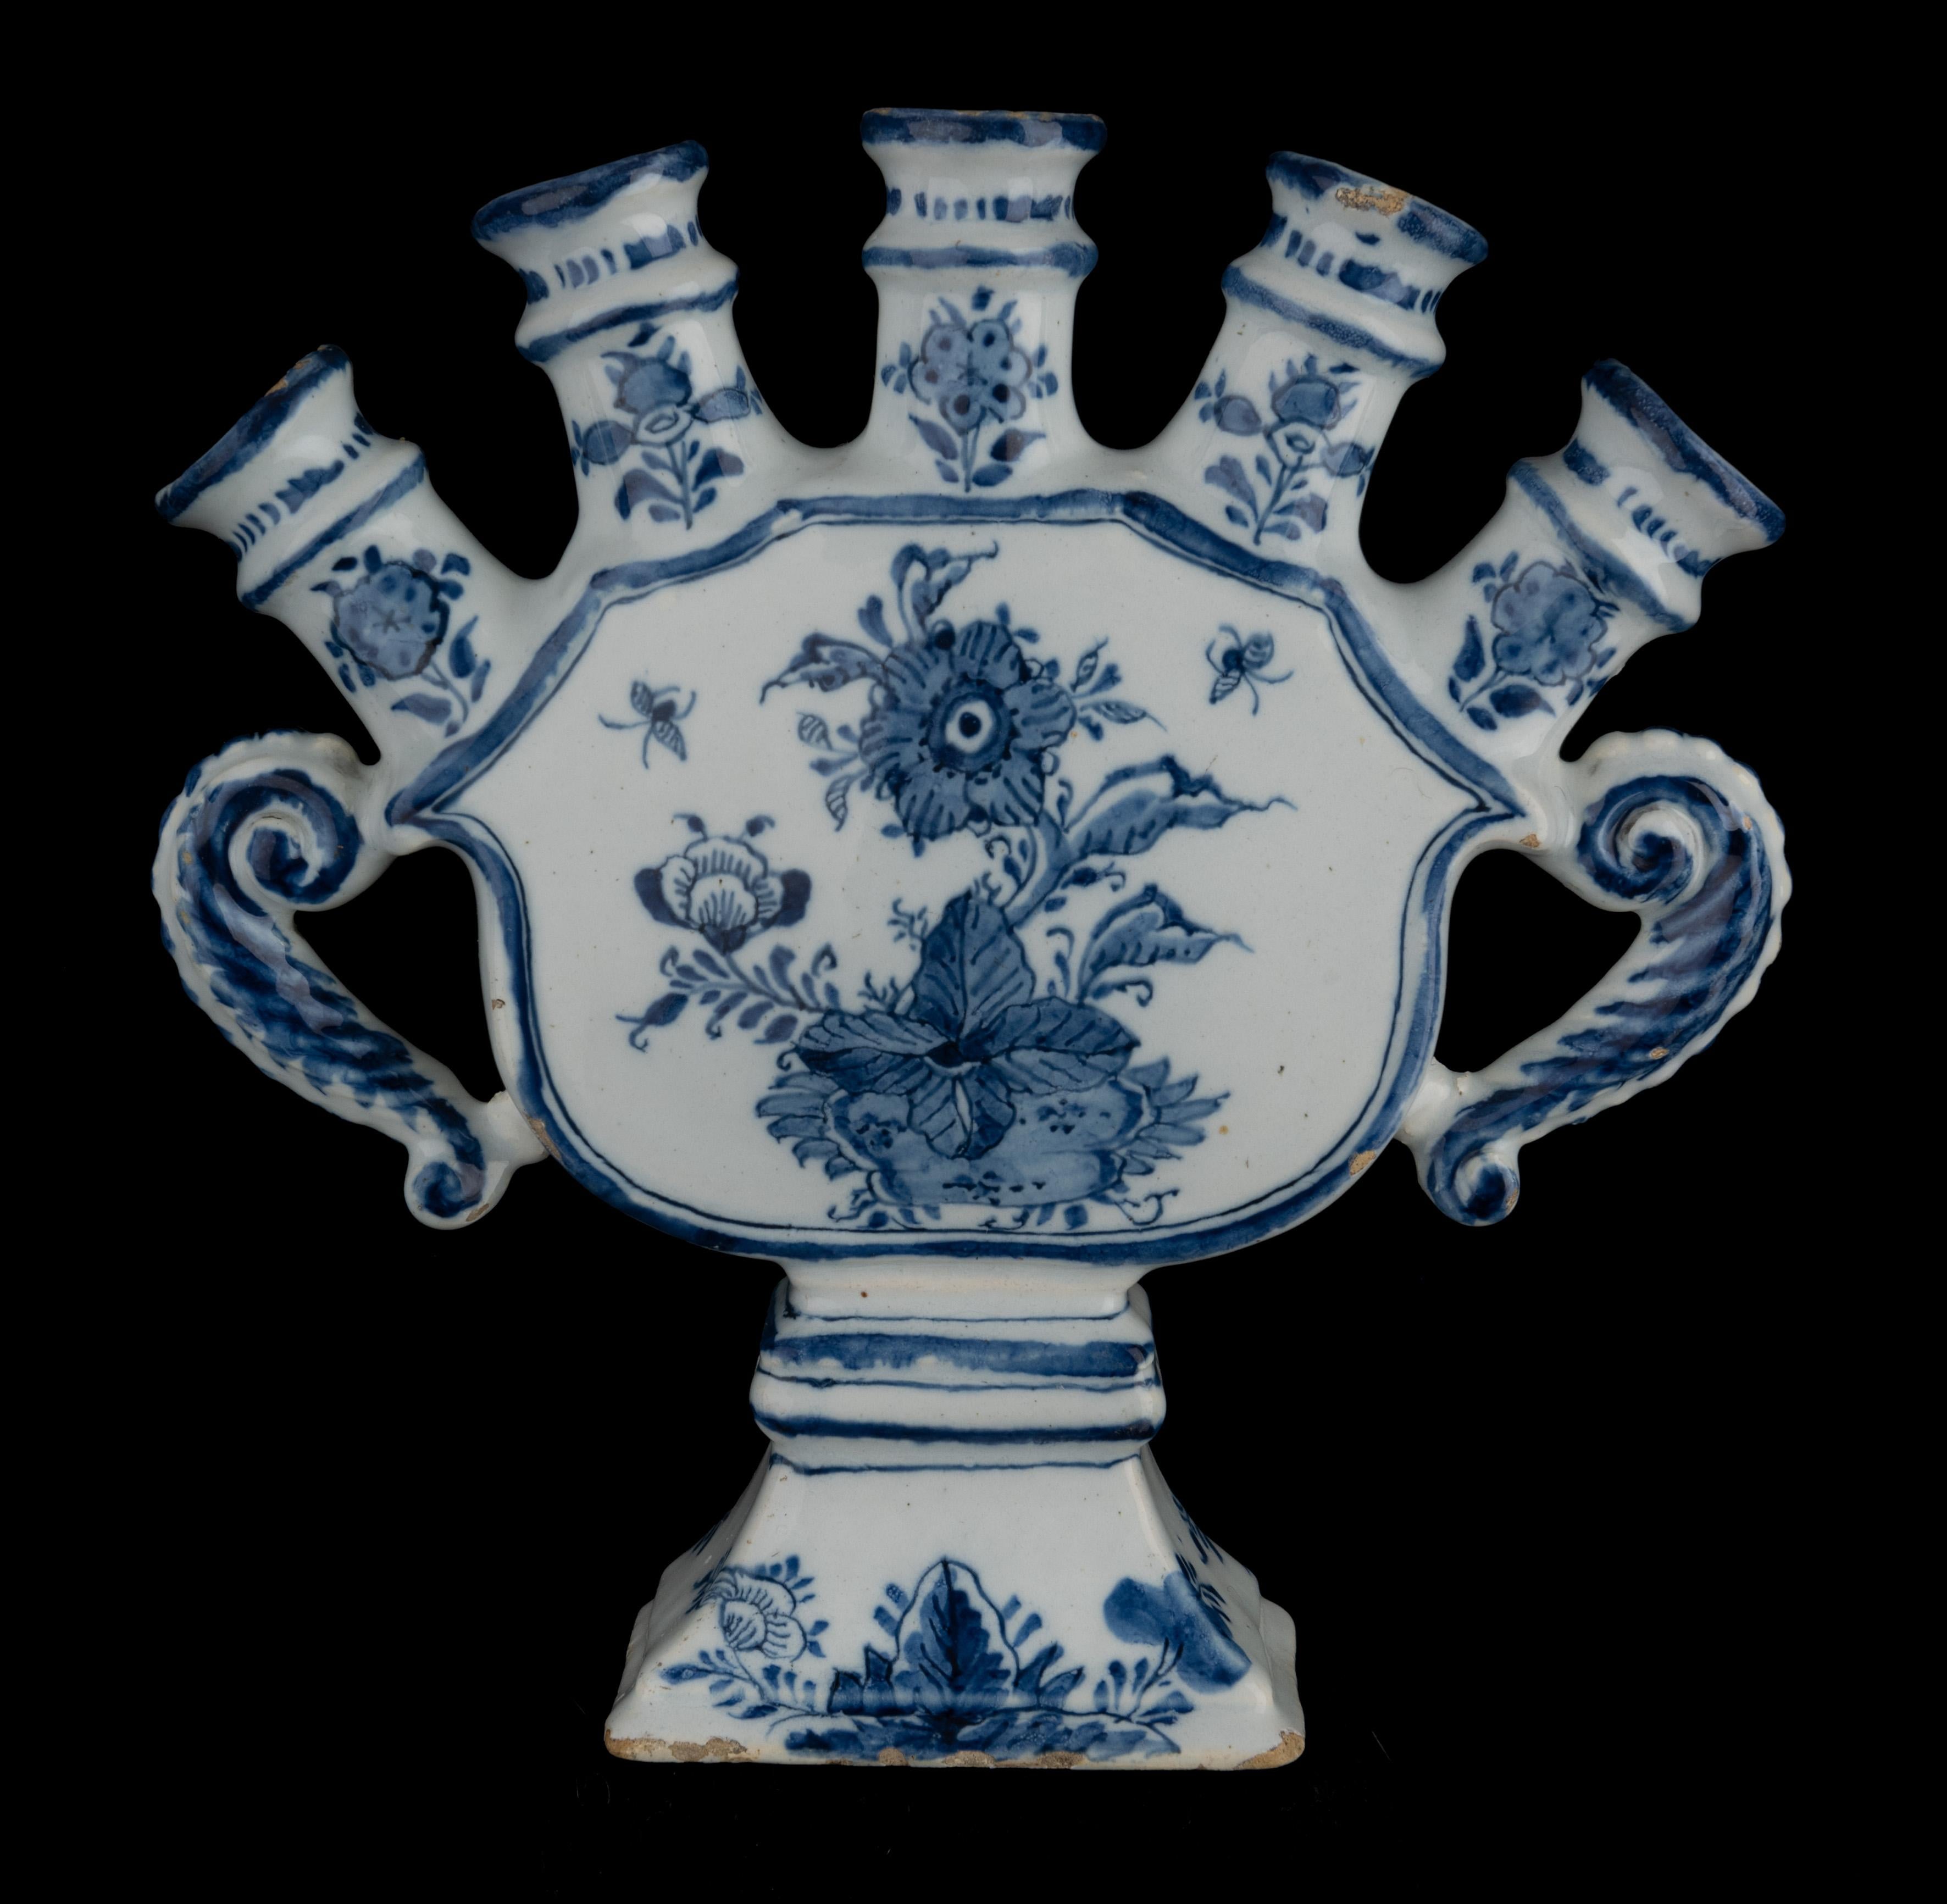 Baroque Delft Blue and White Flower Vase with Spouts 1720-1730 Tulip Vase For Sale